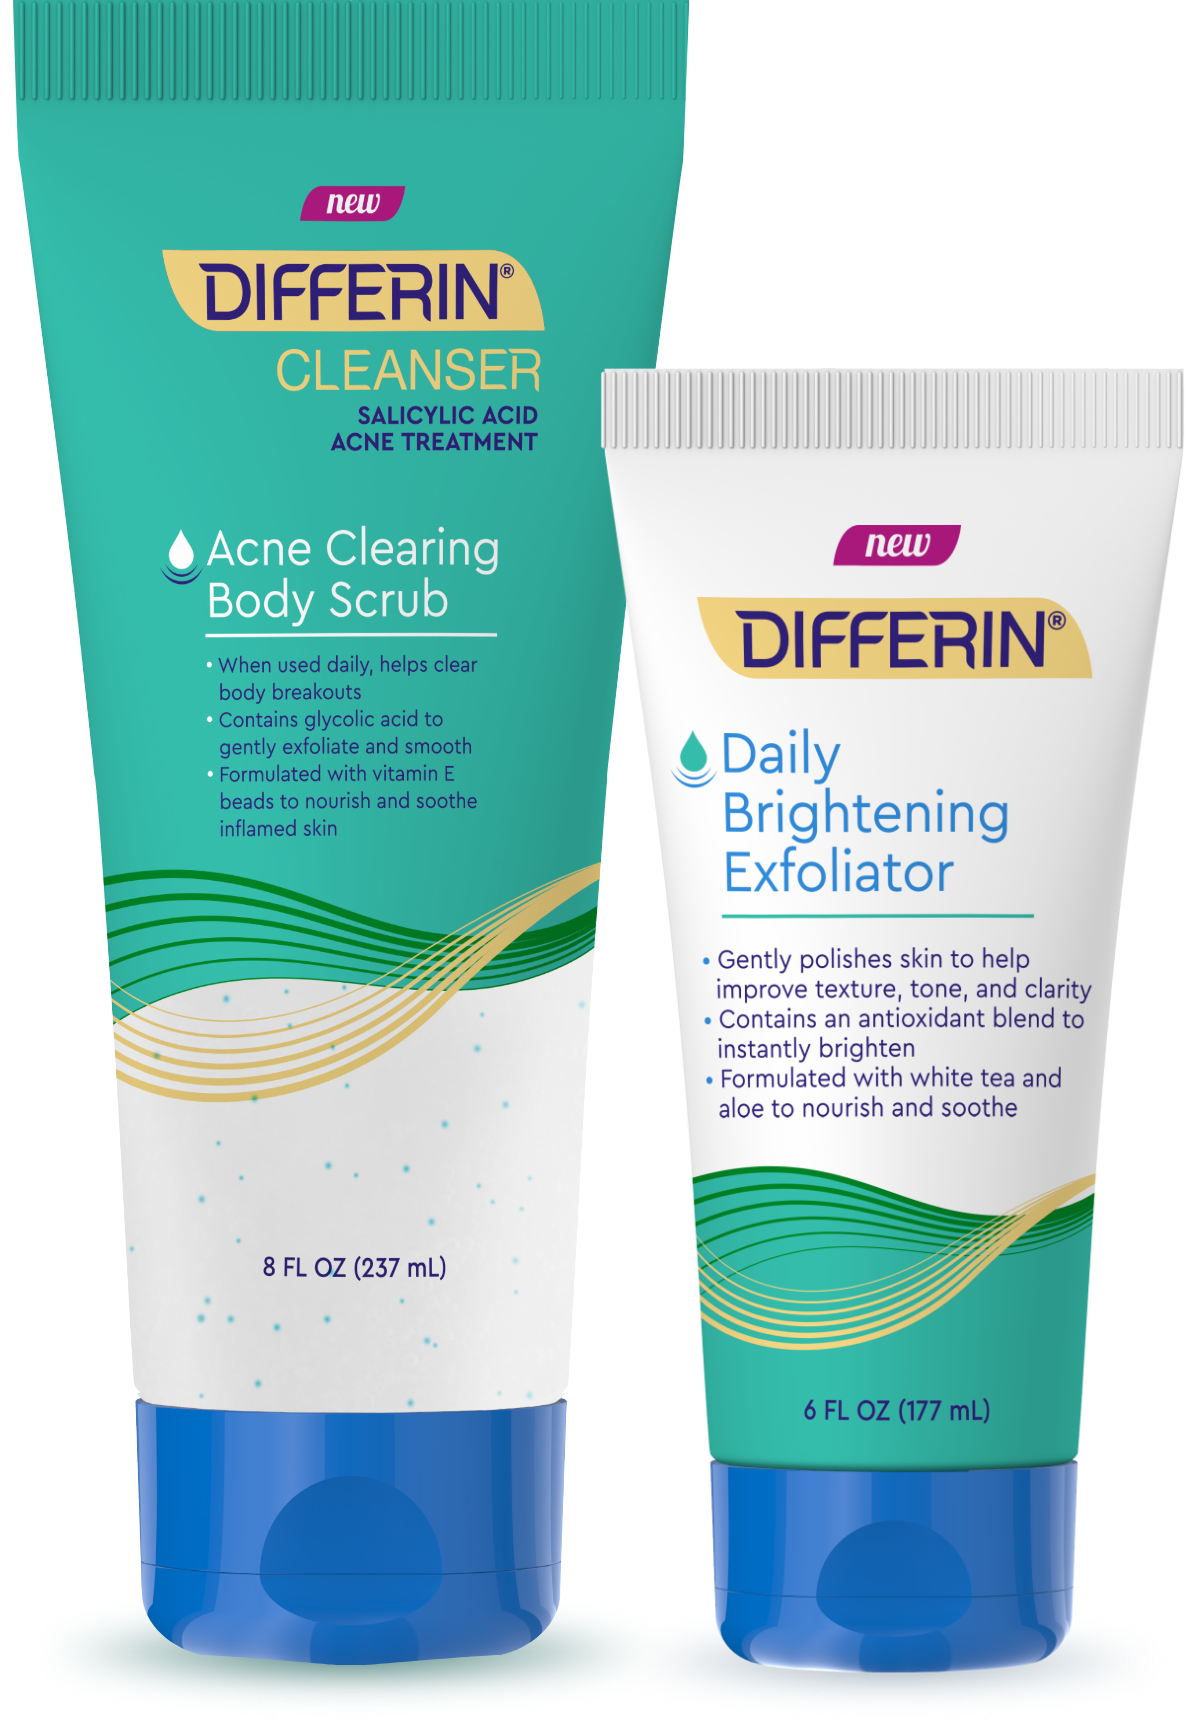 New Differin Cleanser Acne Clearing Body Scrub together with Daily Brightening Exfoliator